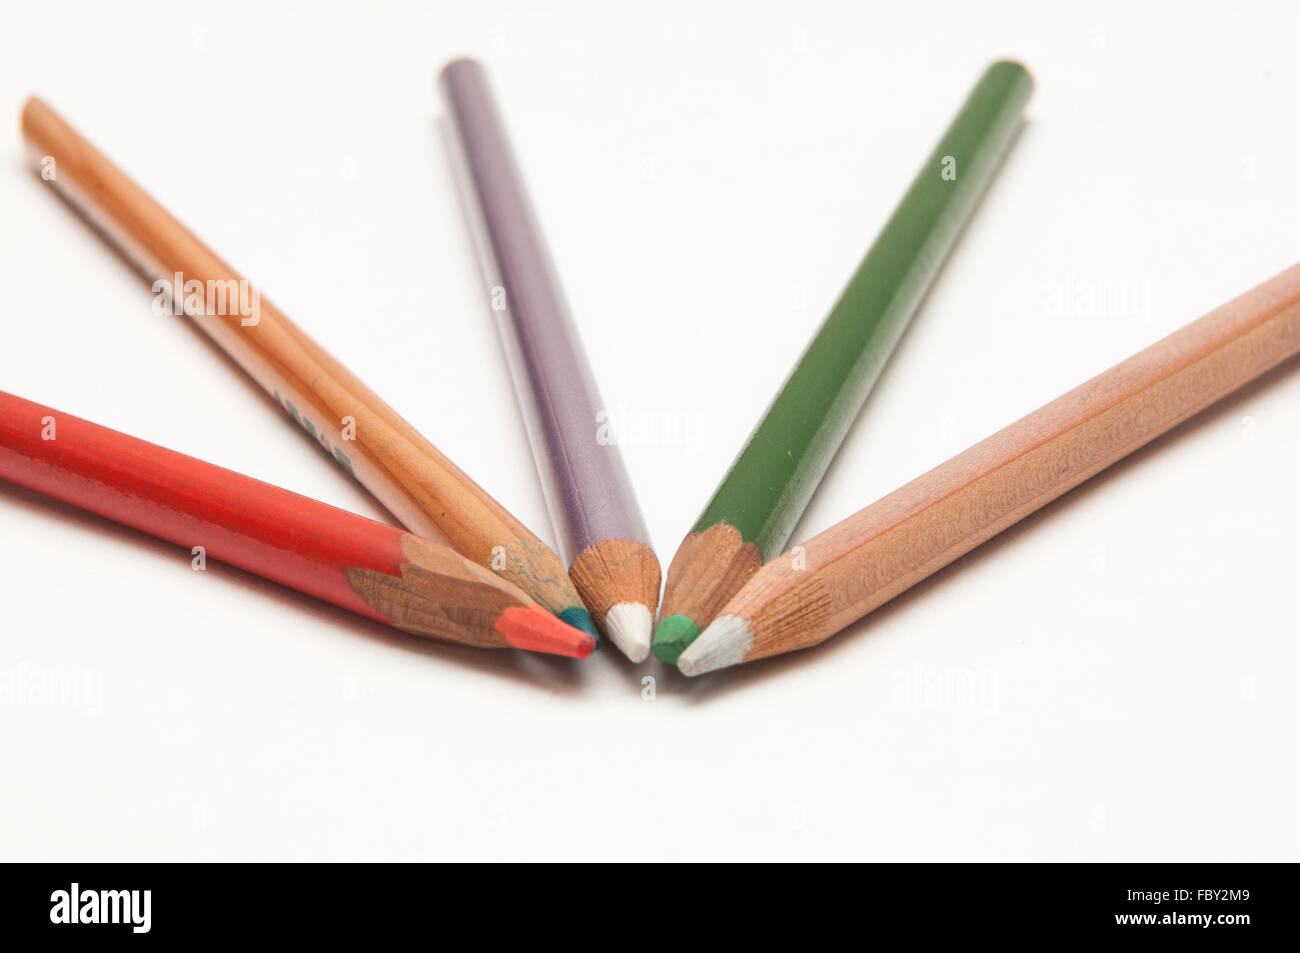 Five coloured pencils arranged on a white background Stock Photo